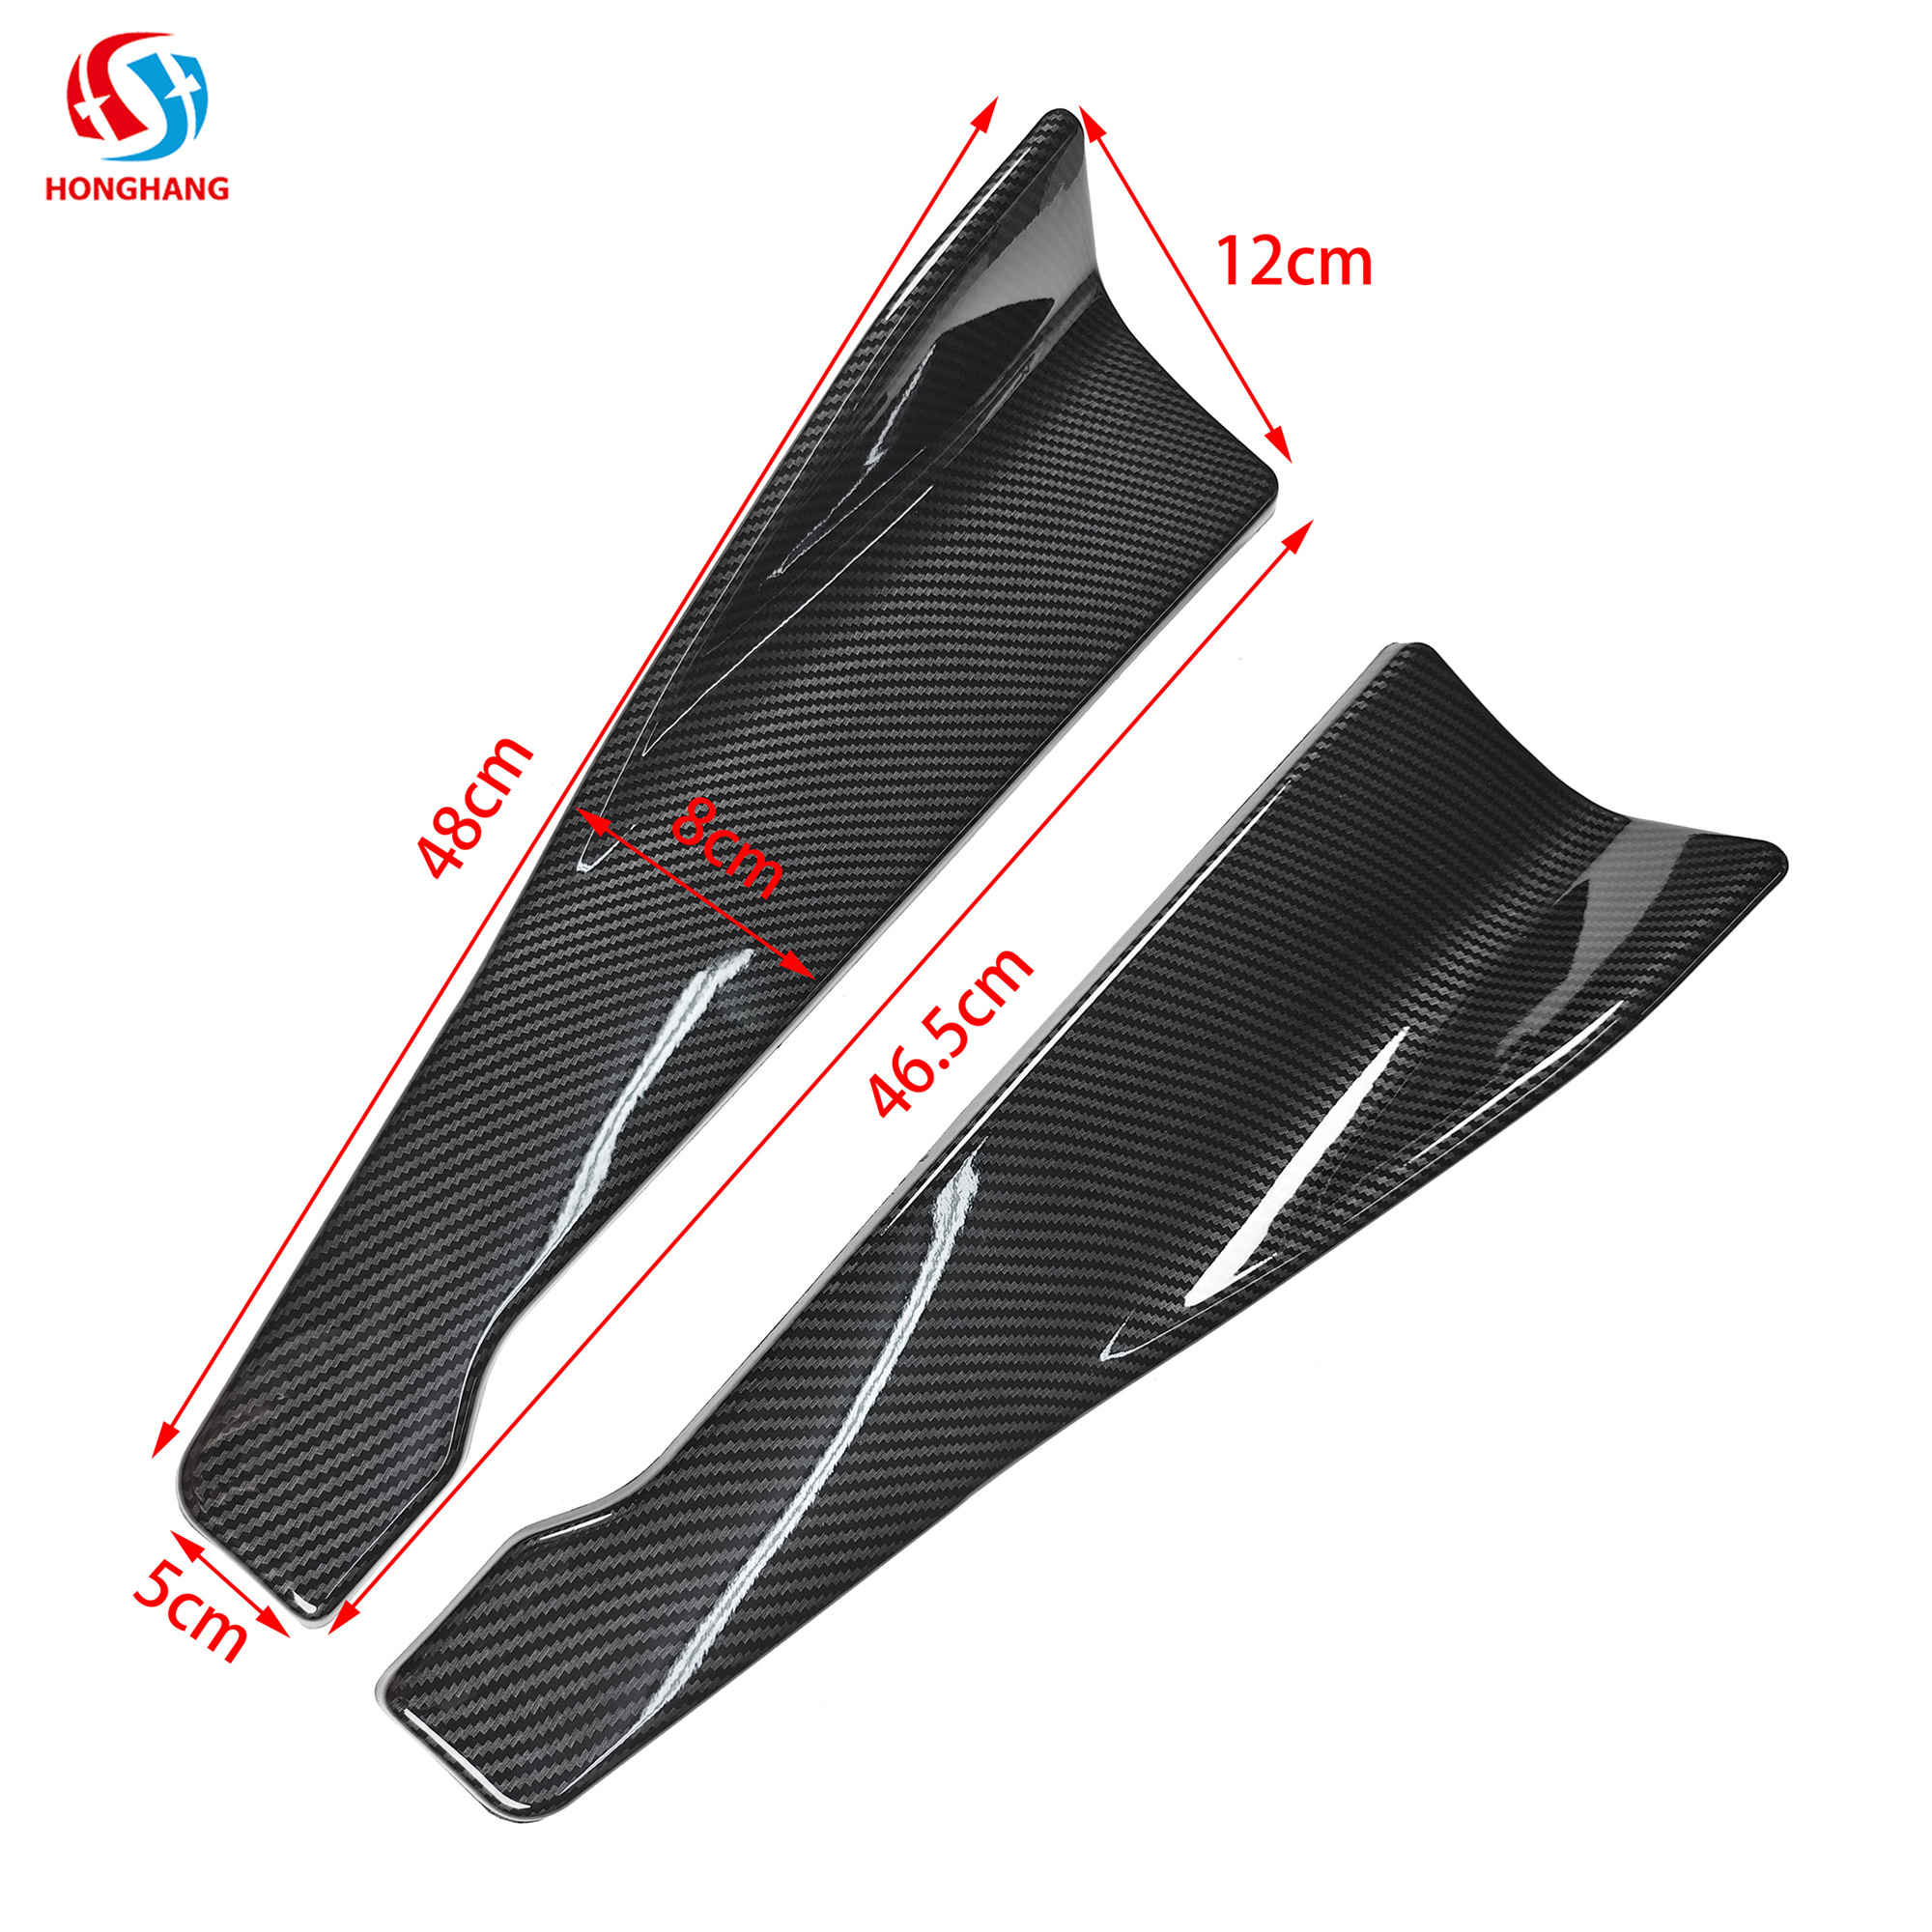 Type B Universal Rear Bumper Spitter Side Corner Protector Lip For All Cars 